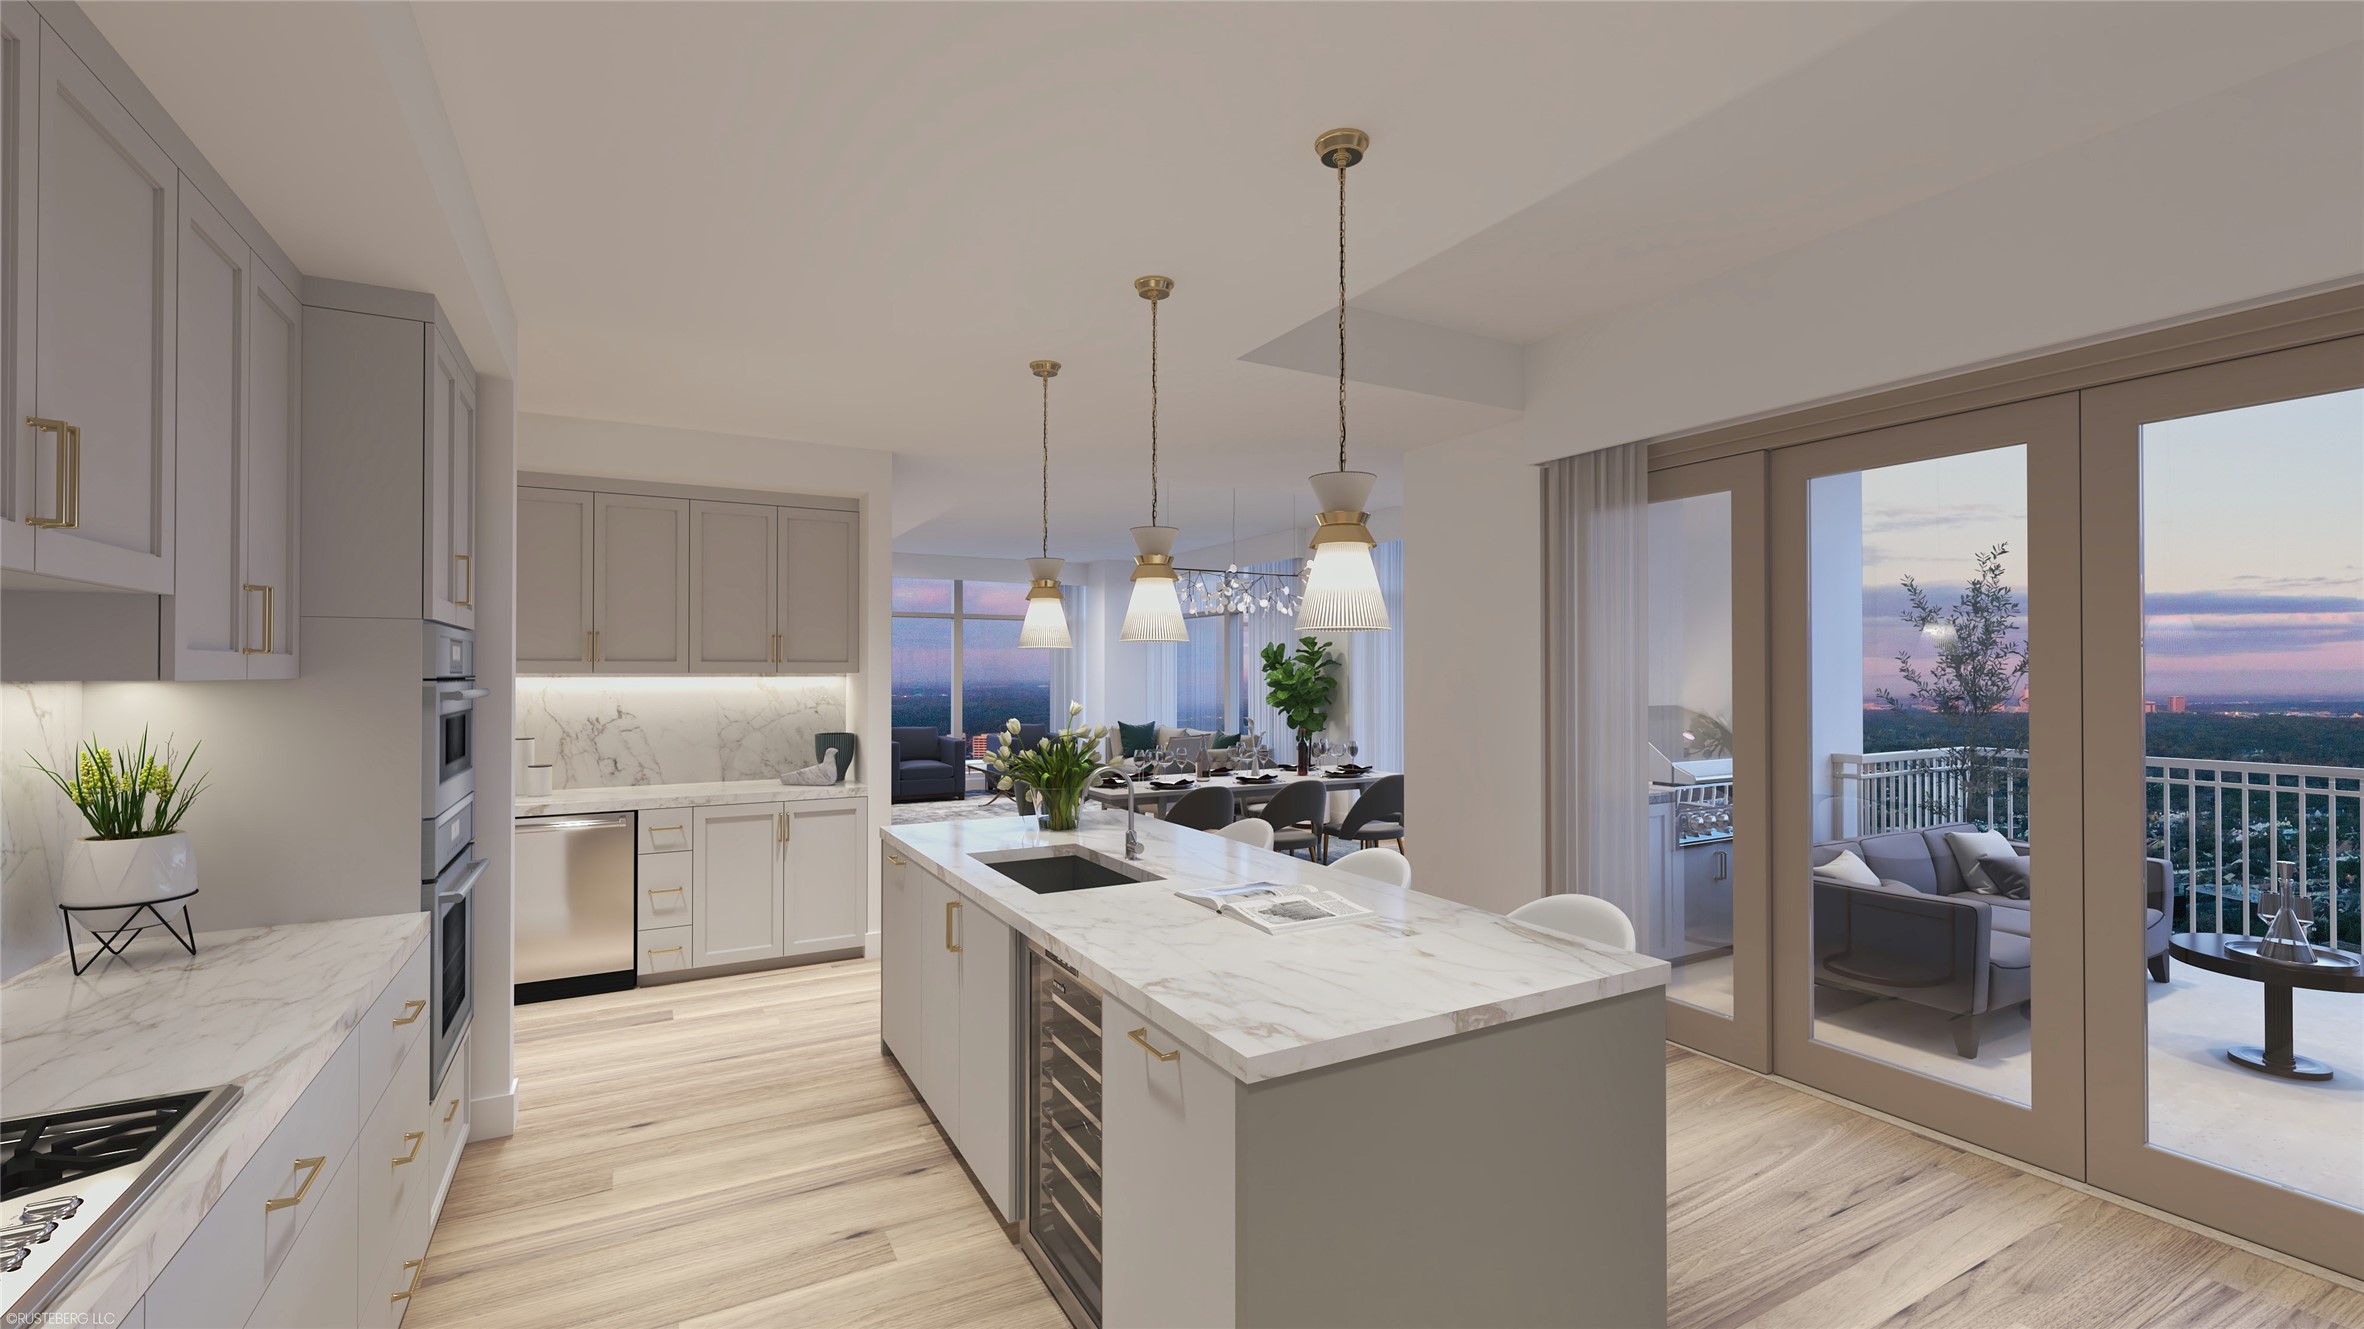 The kitchen includes a curated selection of both Thermador and Sub-Zero appliances. Appointments can be customized to suit your unique preferences with highly-personalized interior design consultations included with purchase. Unlock a residence that is truly yours.